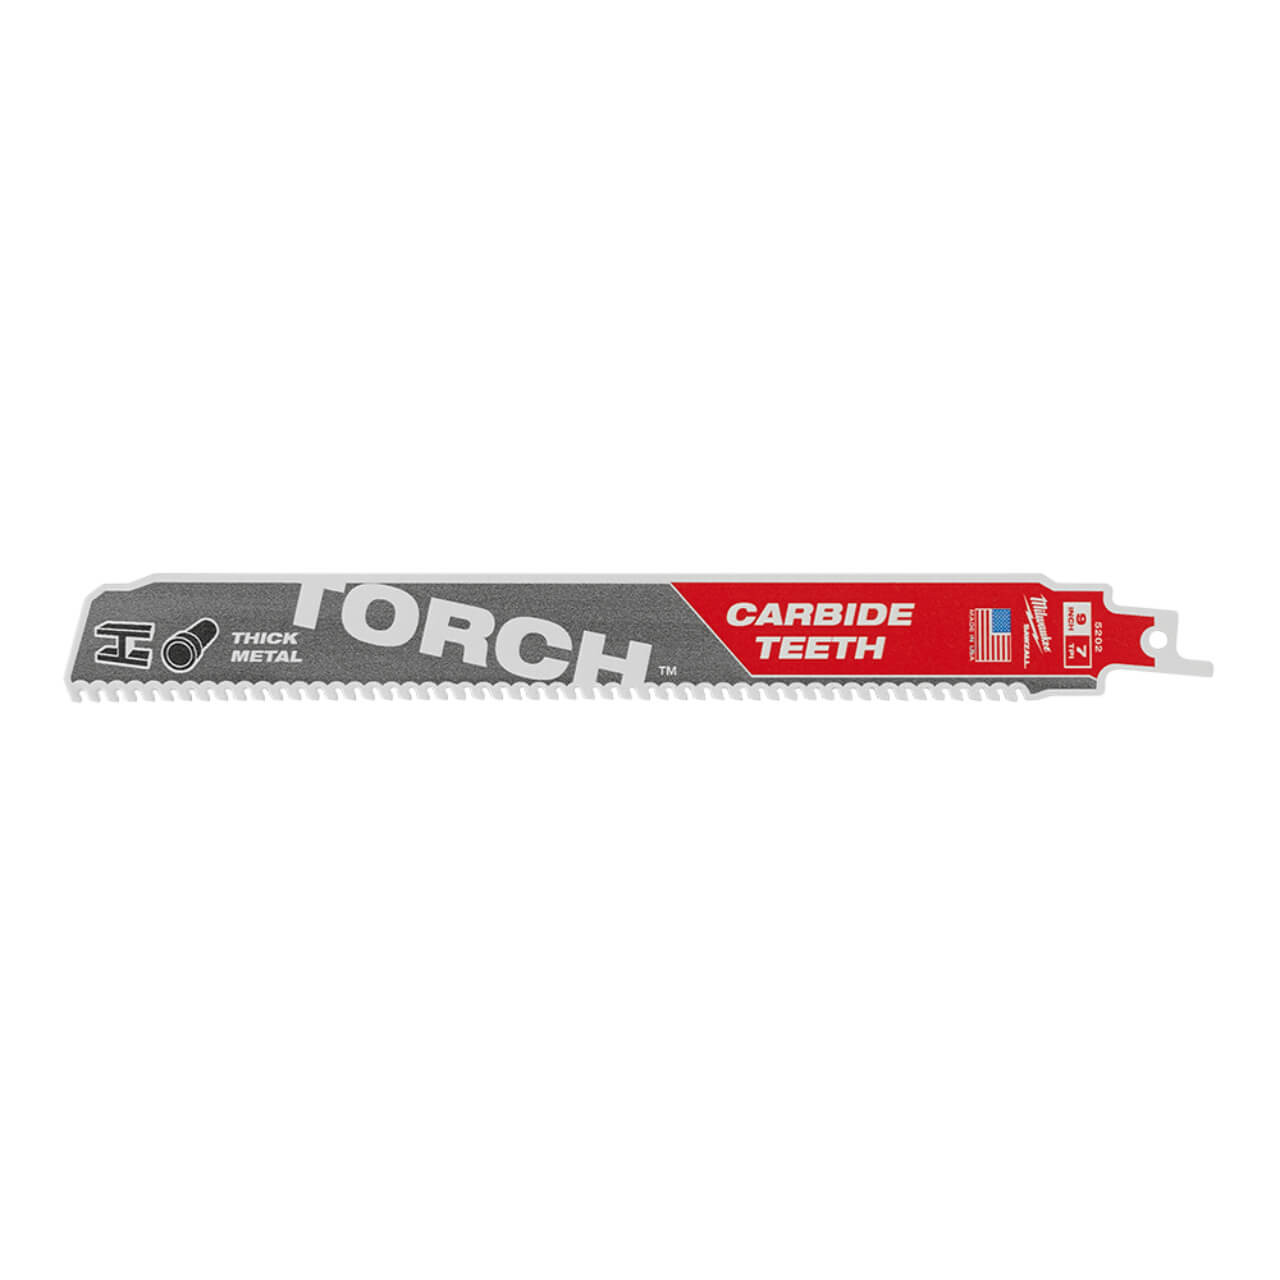 Milwaukee Sawzall 230mm The Torch With Carbide Teeth Metal Demolition Reciprocating Saw Blade 3pk